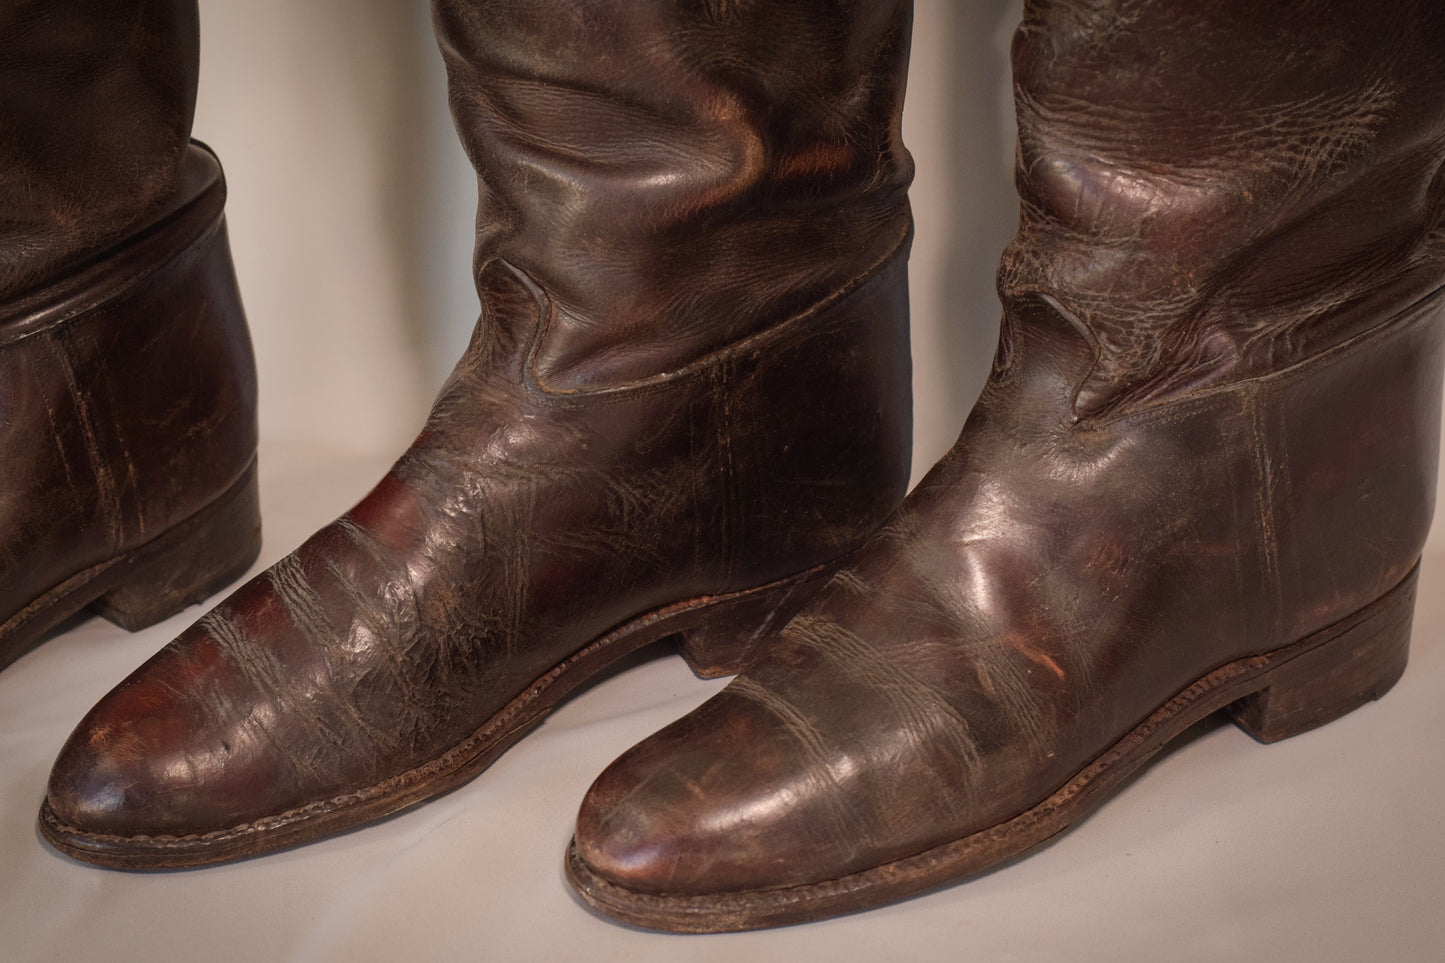 Antique Leather Riding Boots - Two pairs